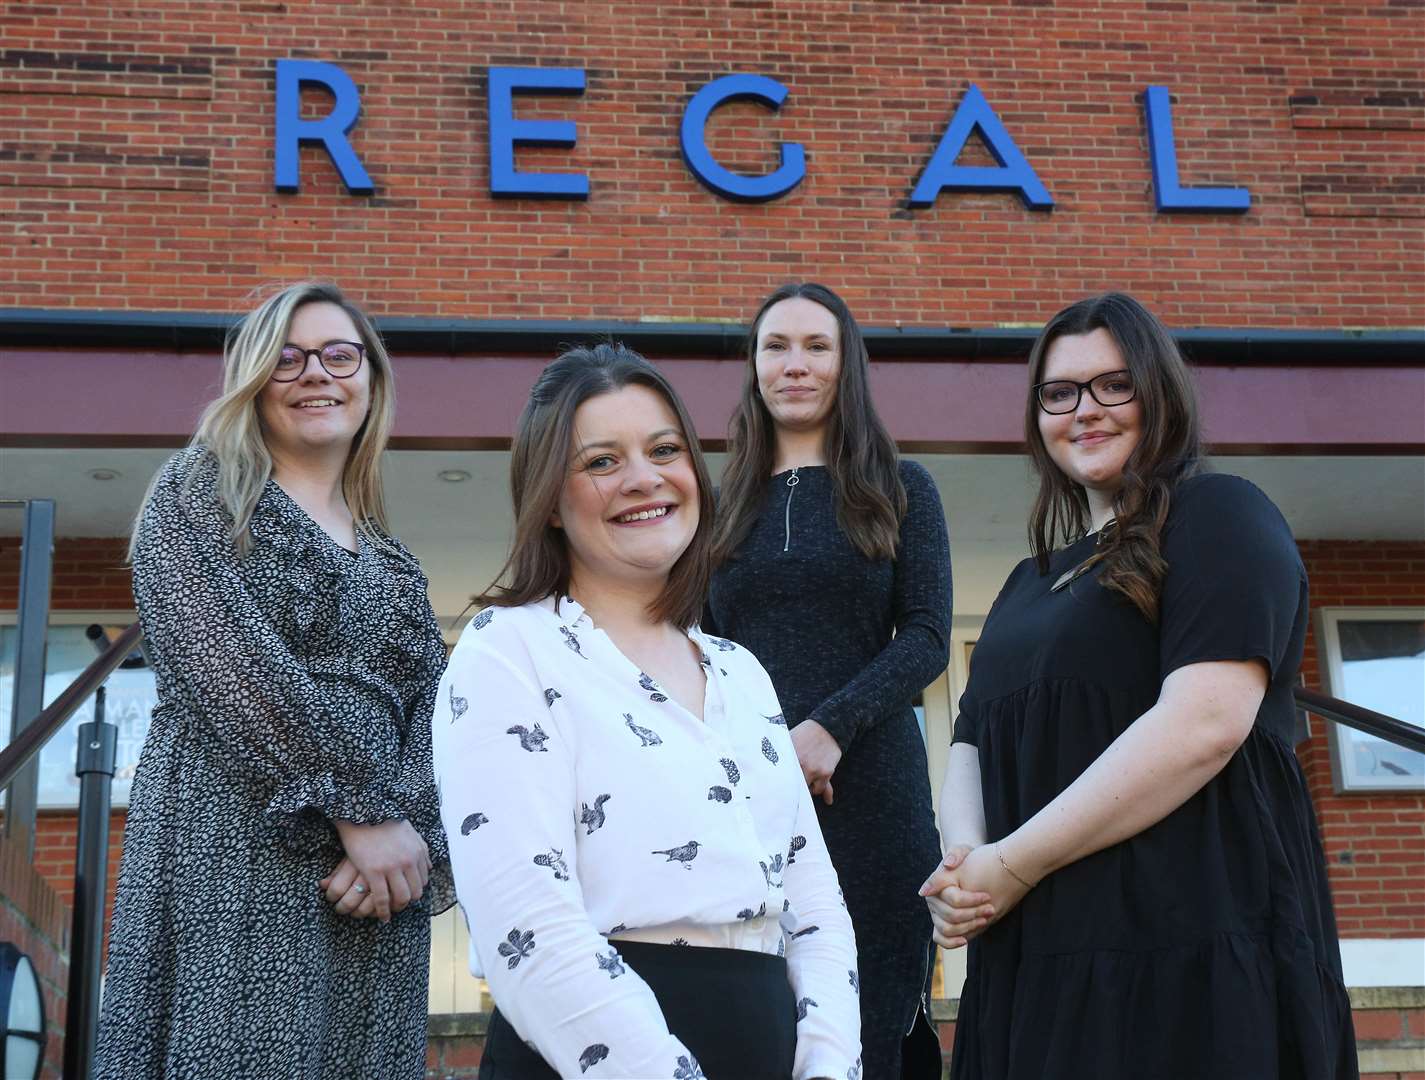 The female management team at The Regal Cinema in Stowmarket features Lucy King, Bethany Couch, Billie King and Lauren Bunce. Picture: Richard Marsham